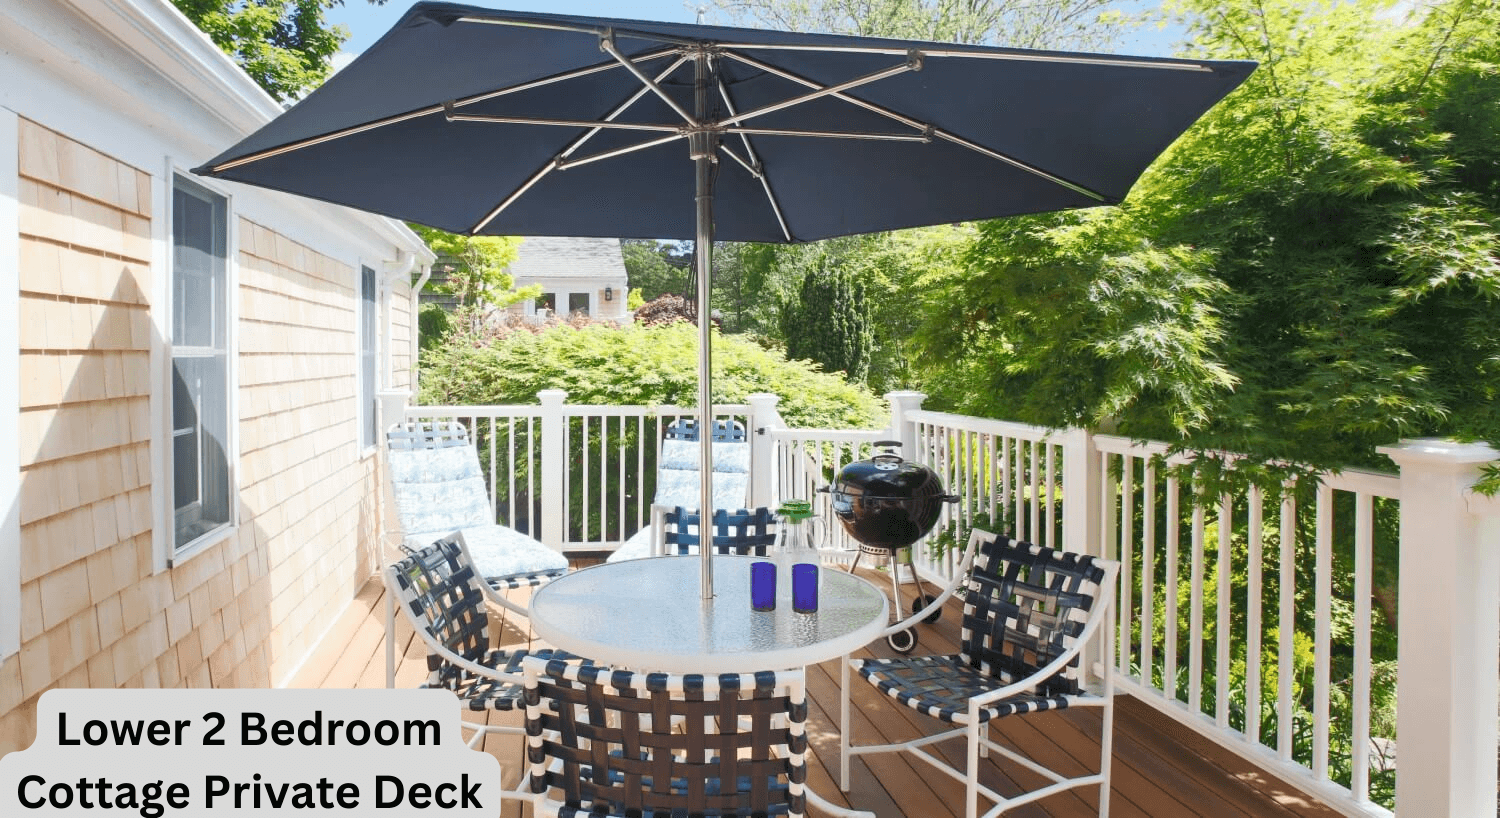 Lower Two Bedroom Cottage private outdoor deck with deck furniture under an umbrella overlooking gardens. 